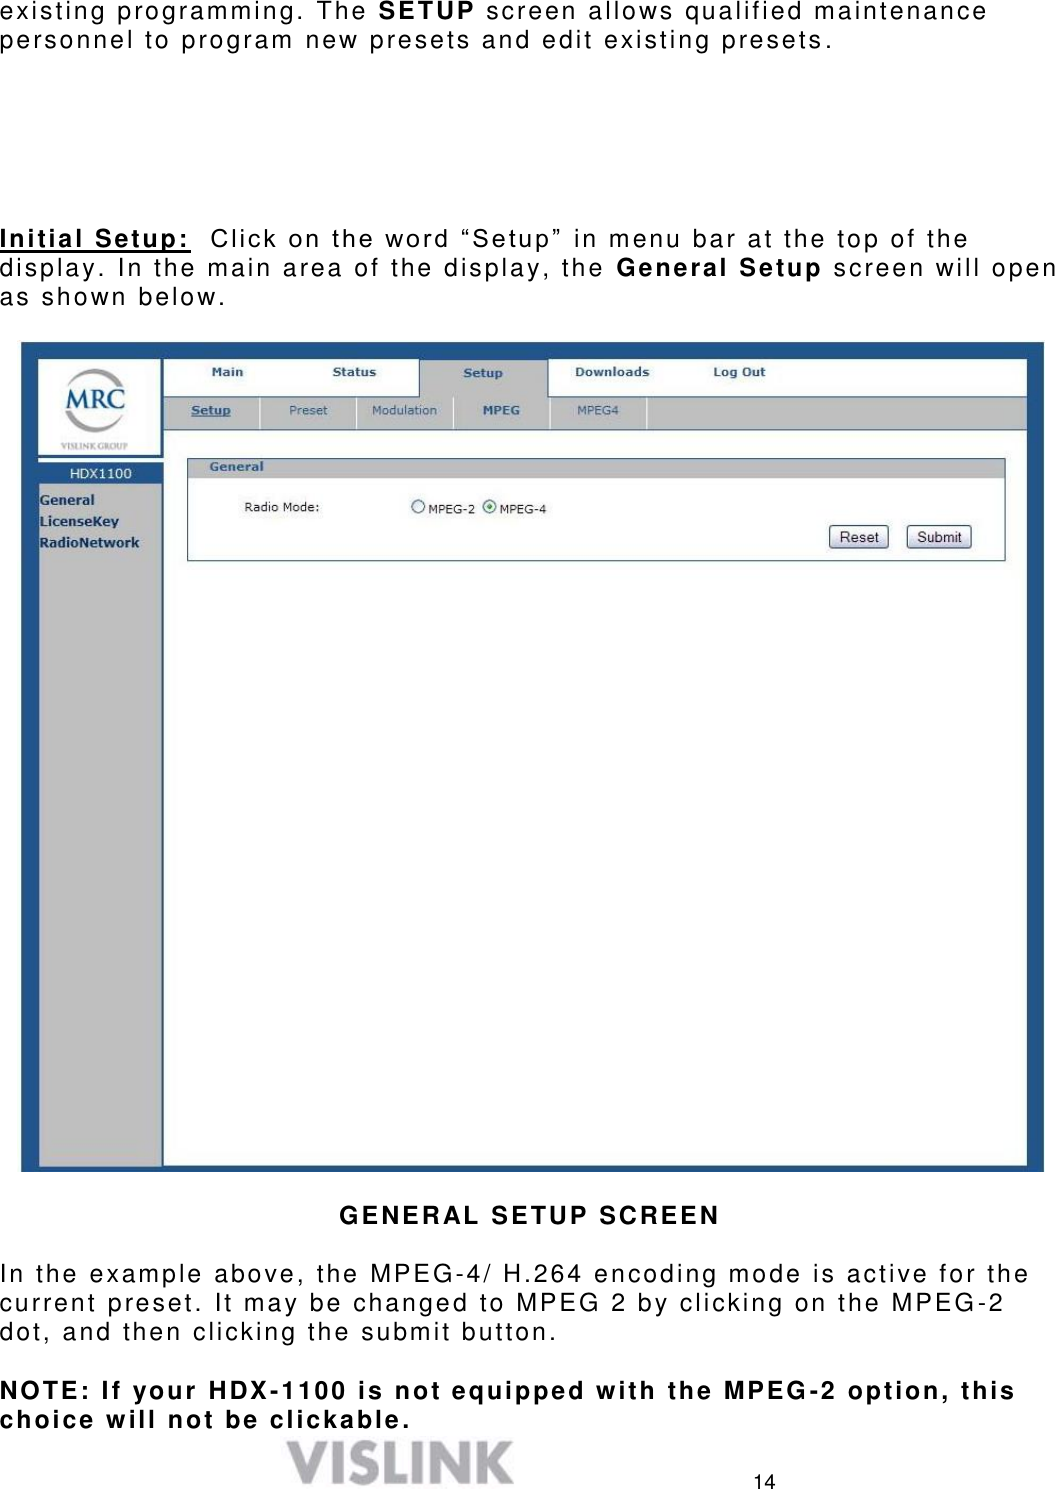  14 existing programming. The SETUP screen allows qualified maintenance personnel to program new presets and edit existing presets .       Initial Setup:  C l ick  on the word ―Se tup ‖  in menu bar at the top of the display. In the main area of the display, the  General Setup screen will open as shown below.      GENERAL SETUP SCREEN  In the example above, the MPEG-4/ H.264 encoding mode is active for the current preset. It may be changed to MPEG 2 by clicking on the MPEG -2 dot, and then clicking the submit button.  NOTE: If your HDX-1100 is not equipped with the MPEG -2 option, this choice will not be clickable.  